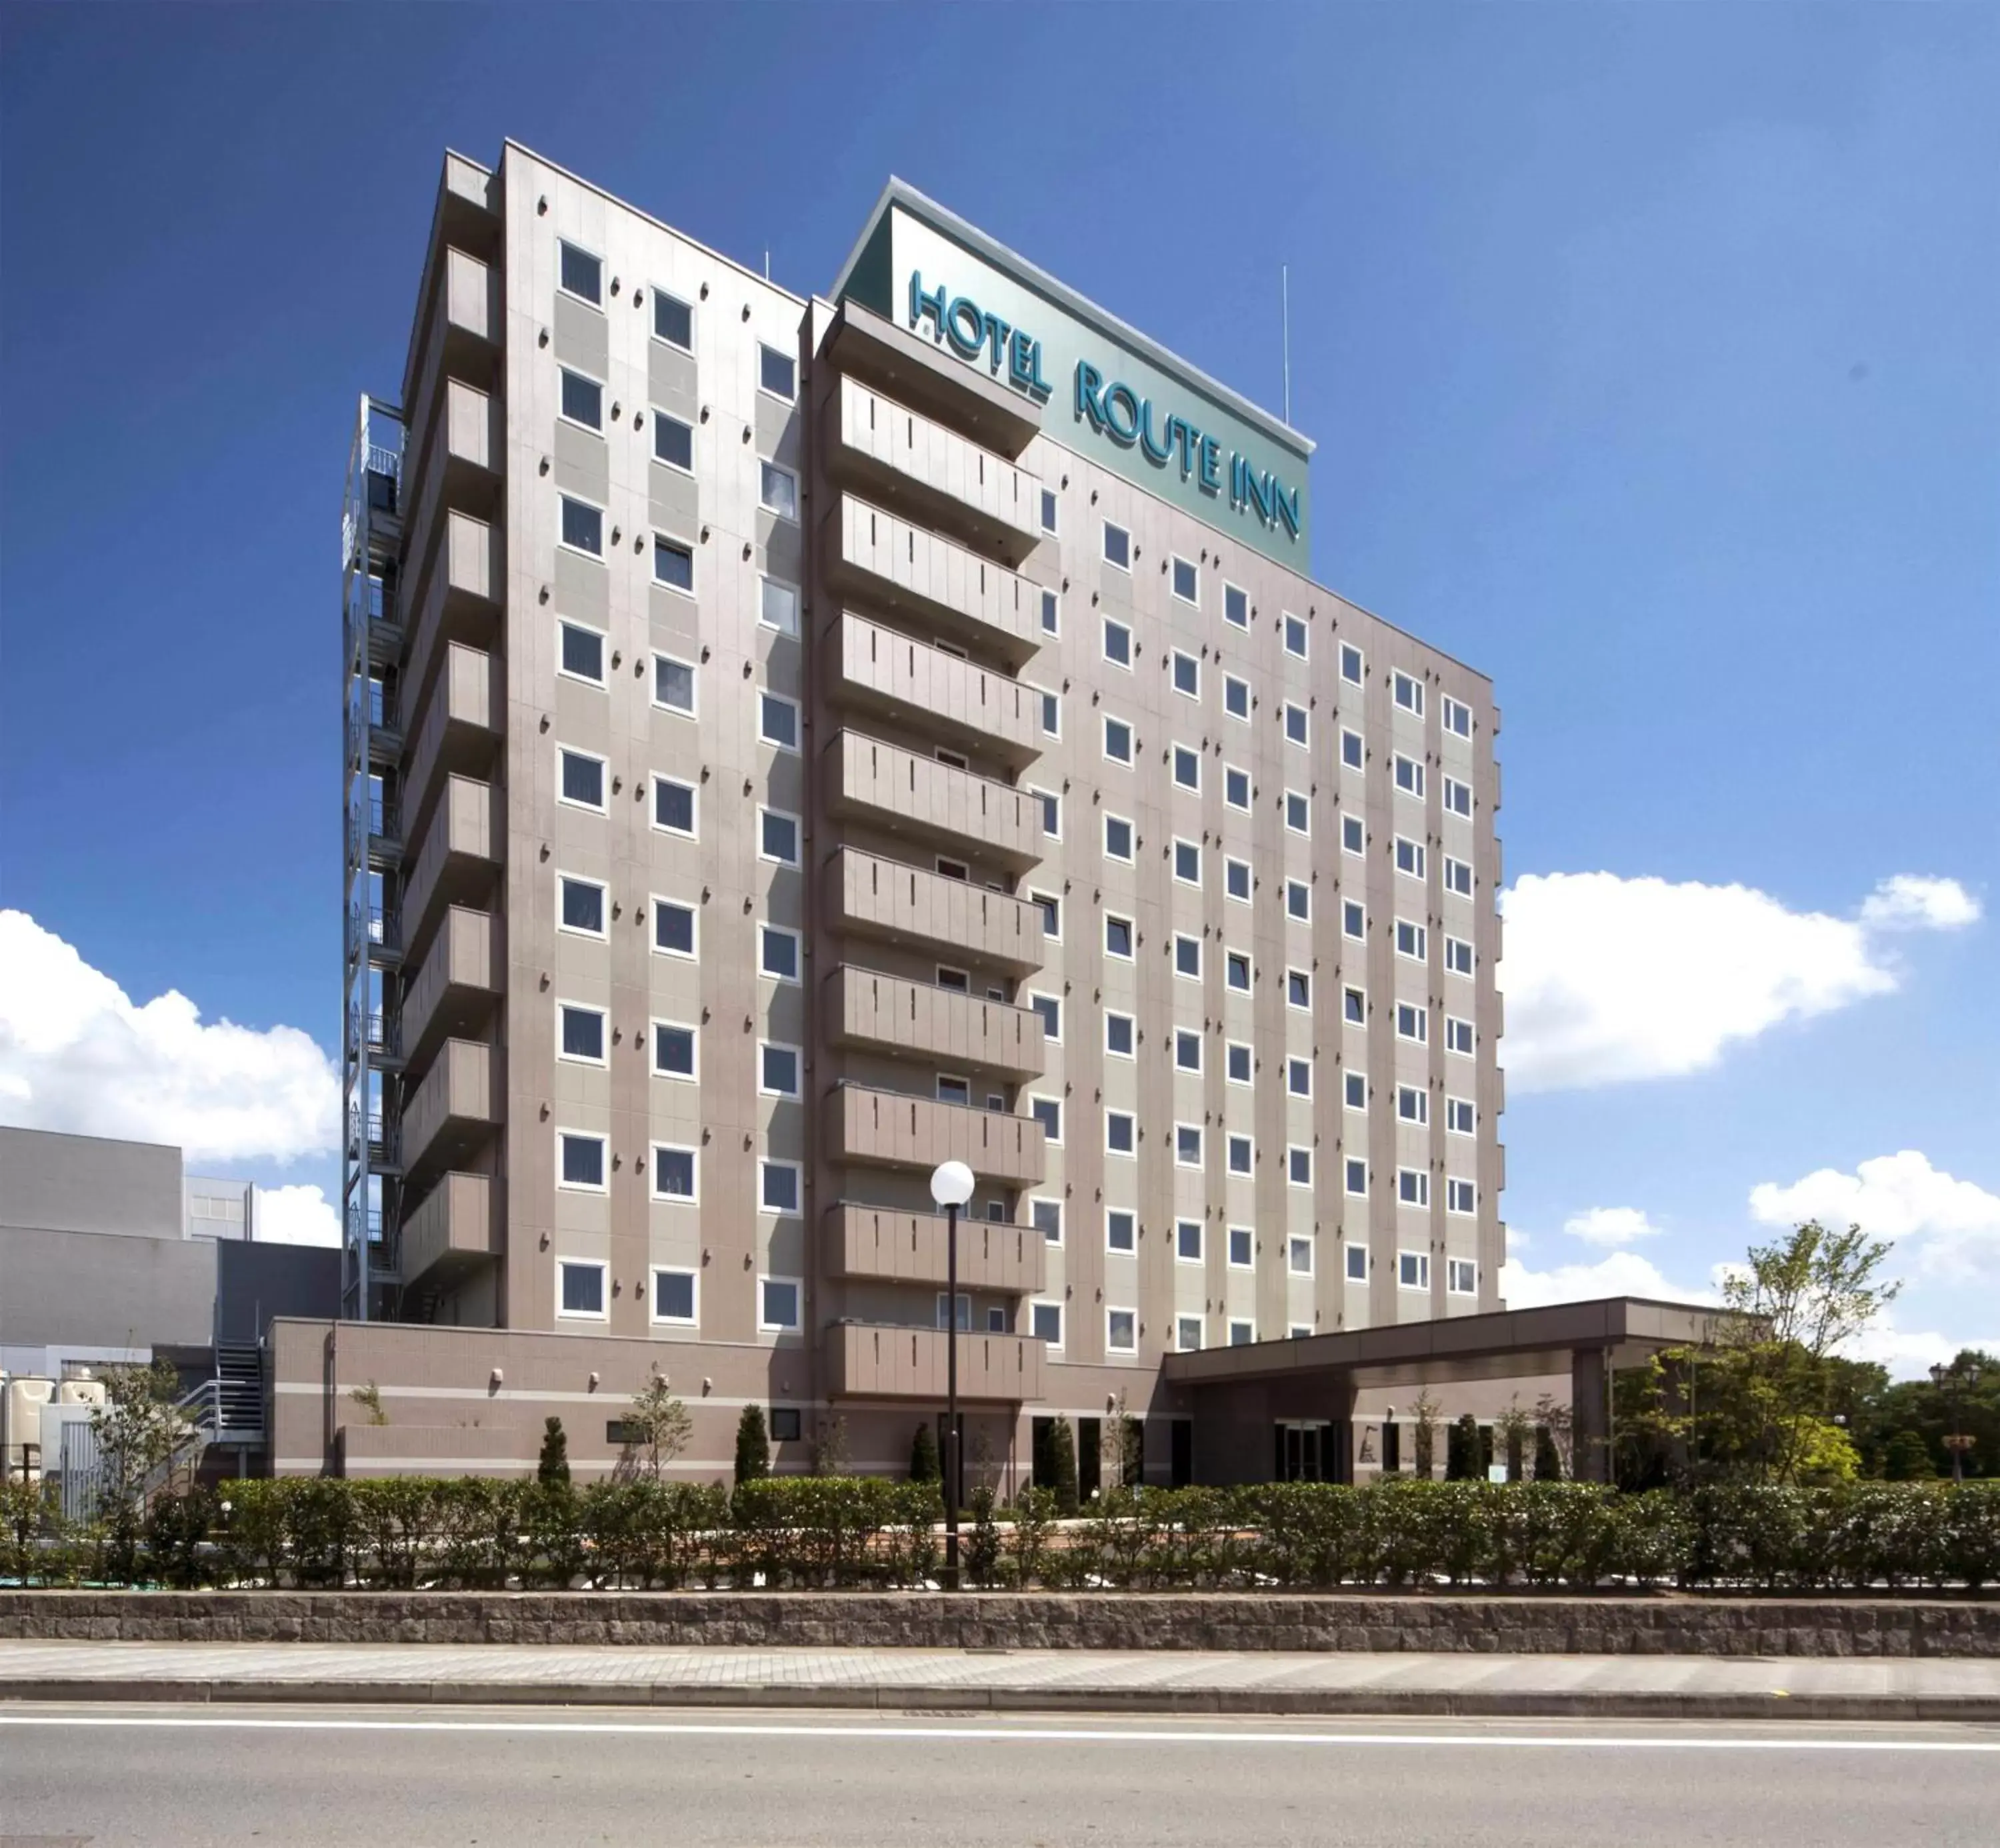 Property Building in Hotel Route Inn Ono